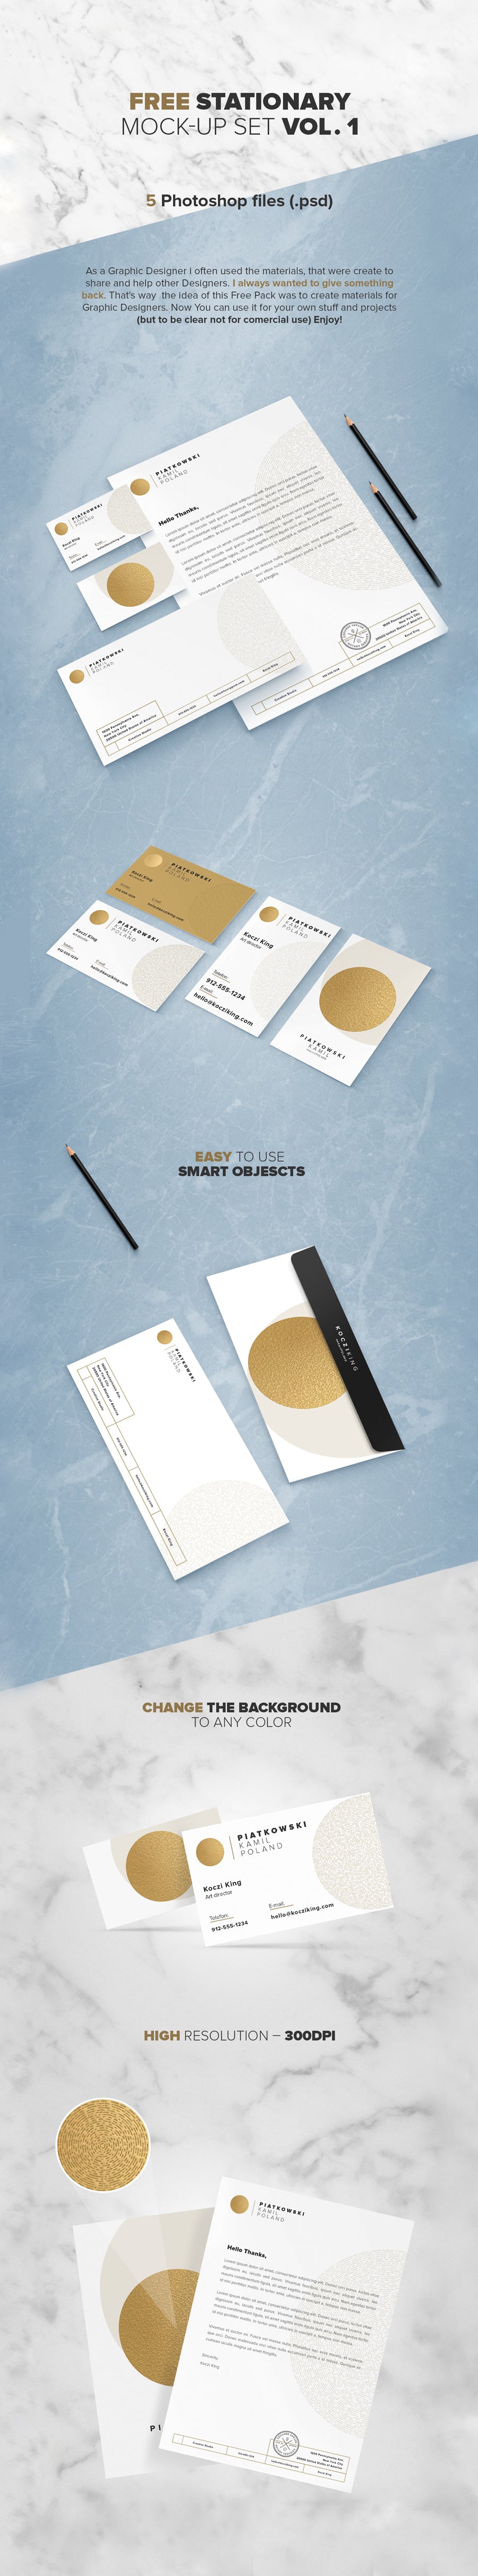 Free Stationary Mock-Up Set Multiple Views and Angles